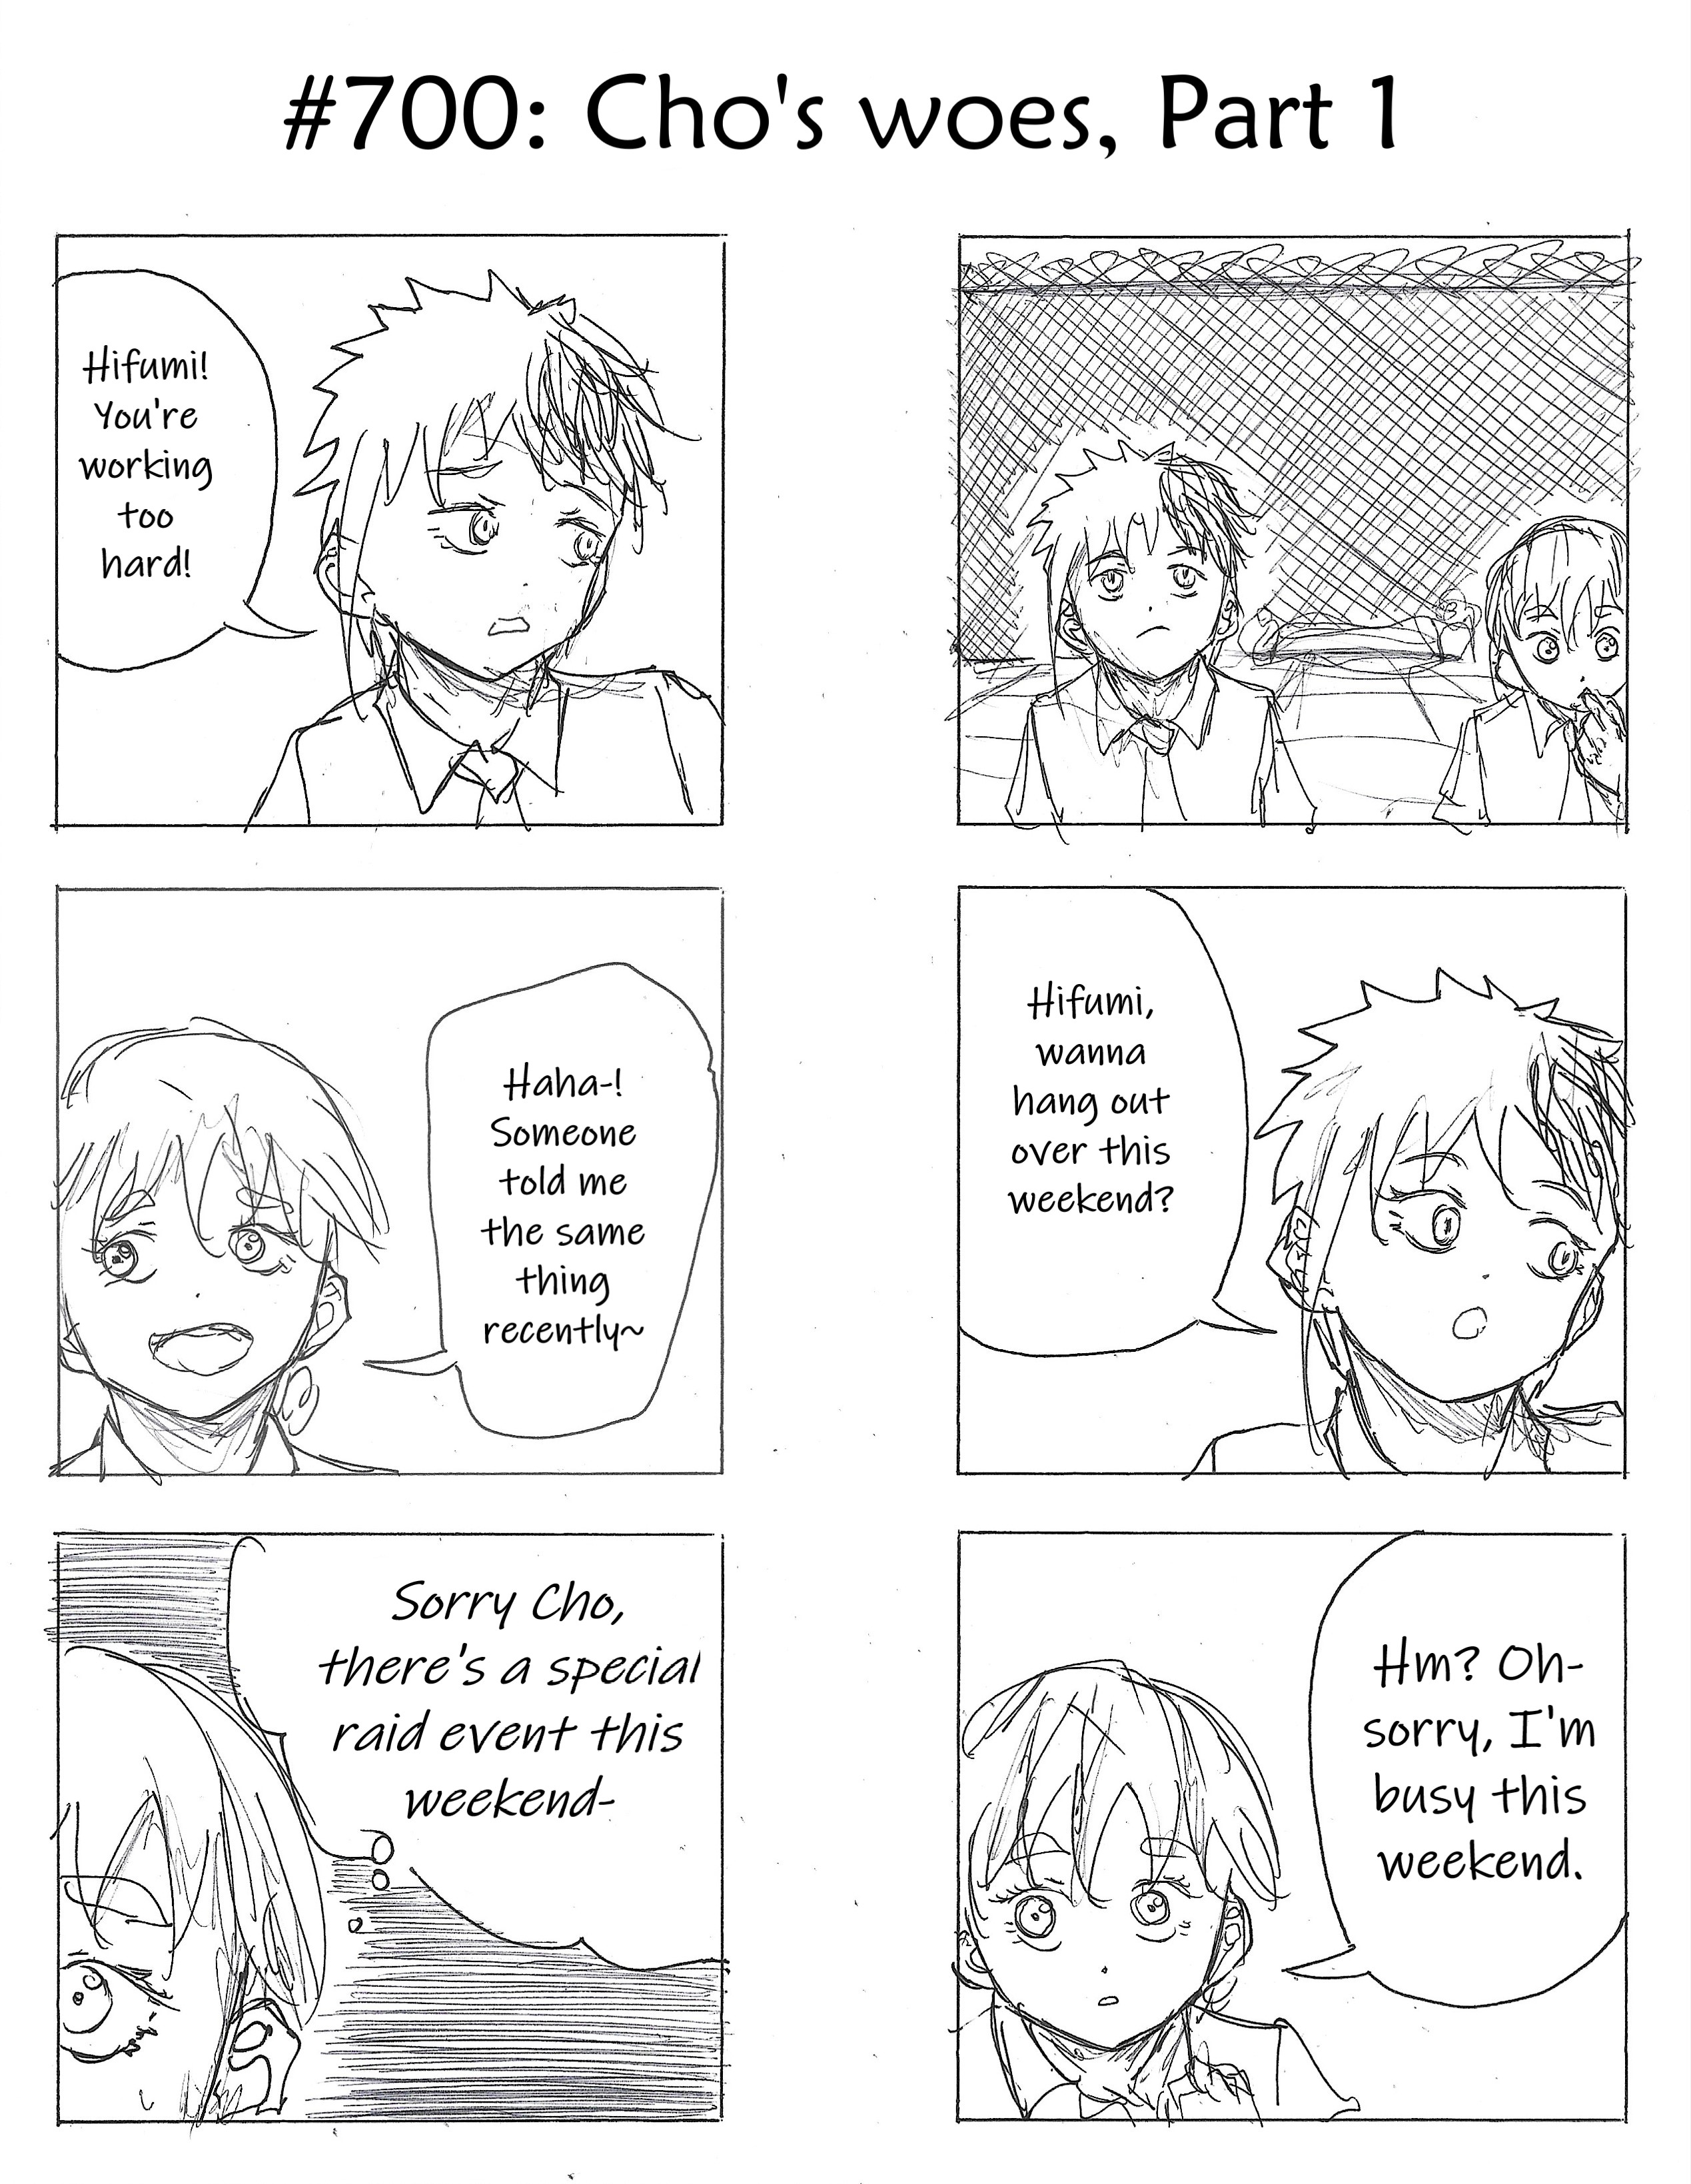 Sound Asleep: Forgotten Memories Vol.7 Chapter 700: Cho’S Woes, Part 1 - Picture 1